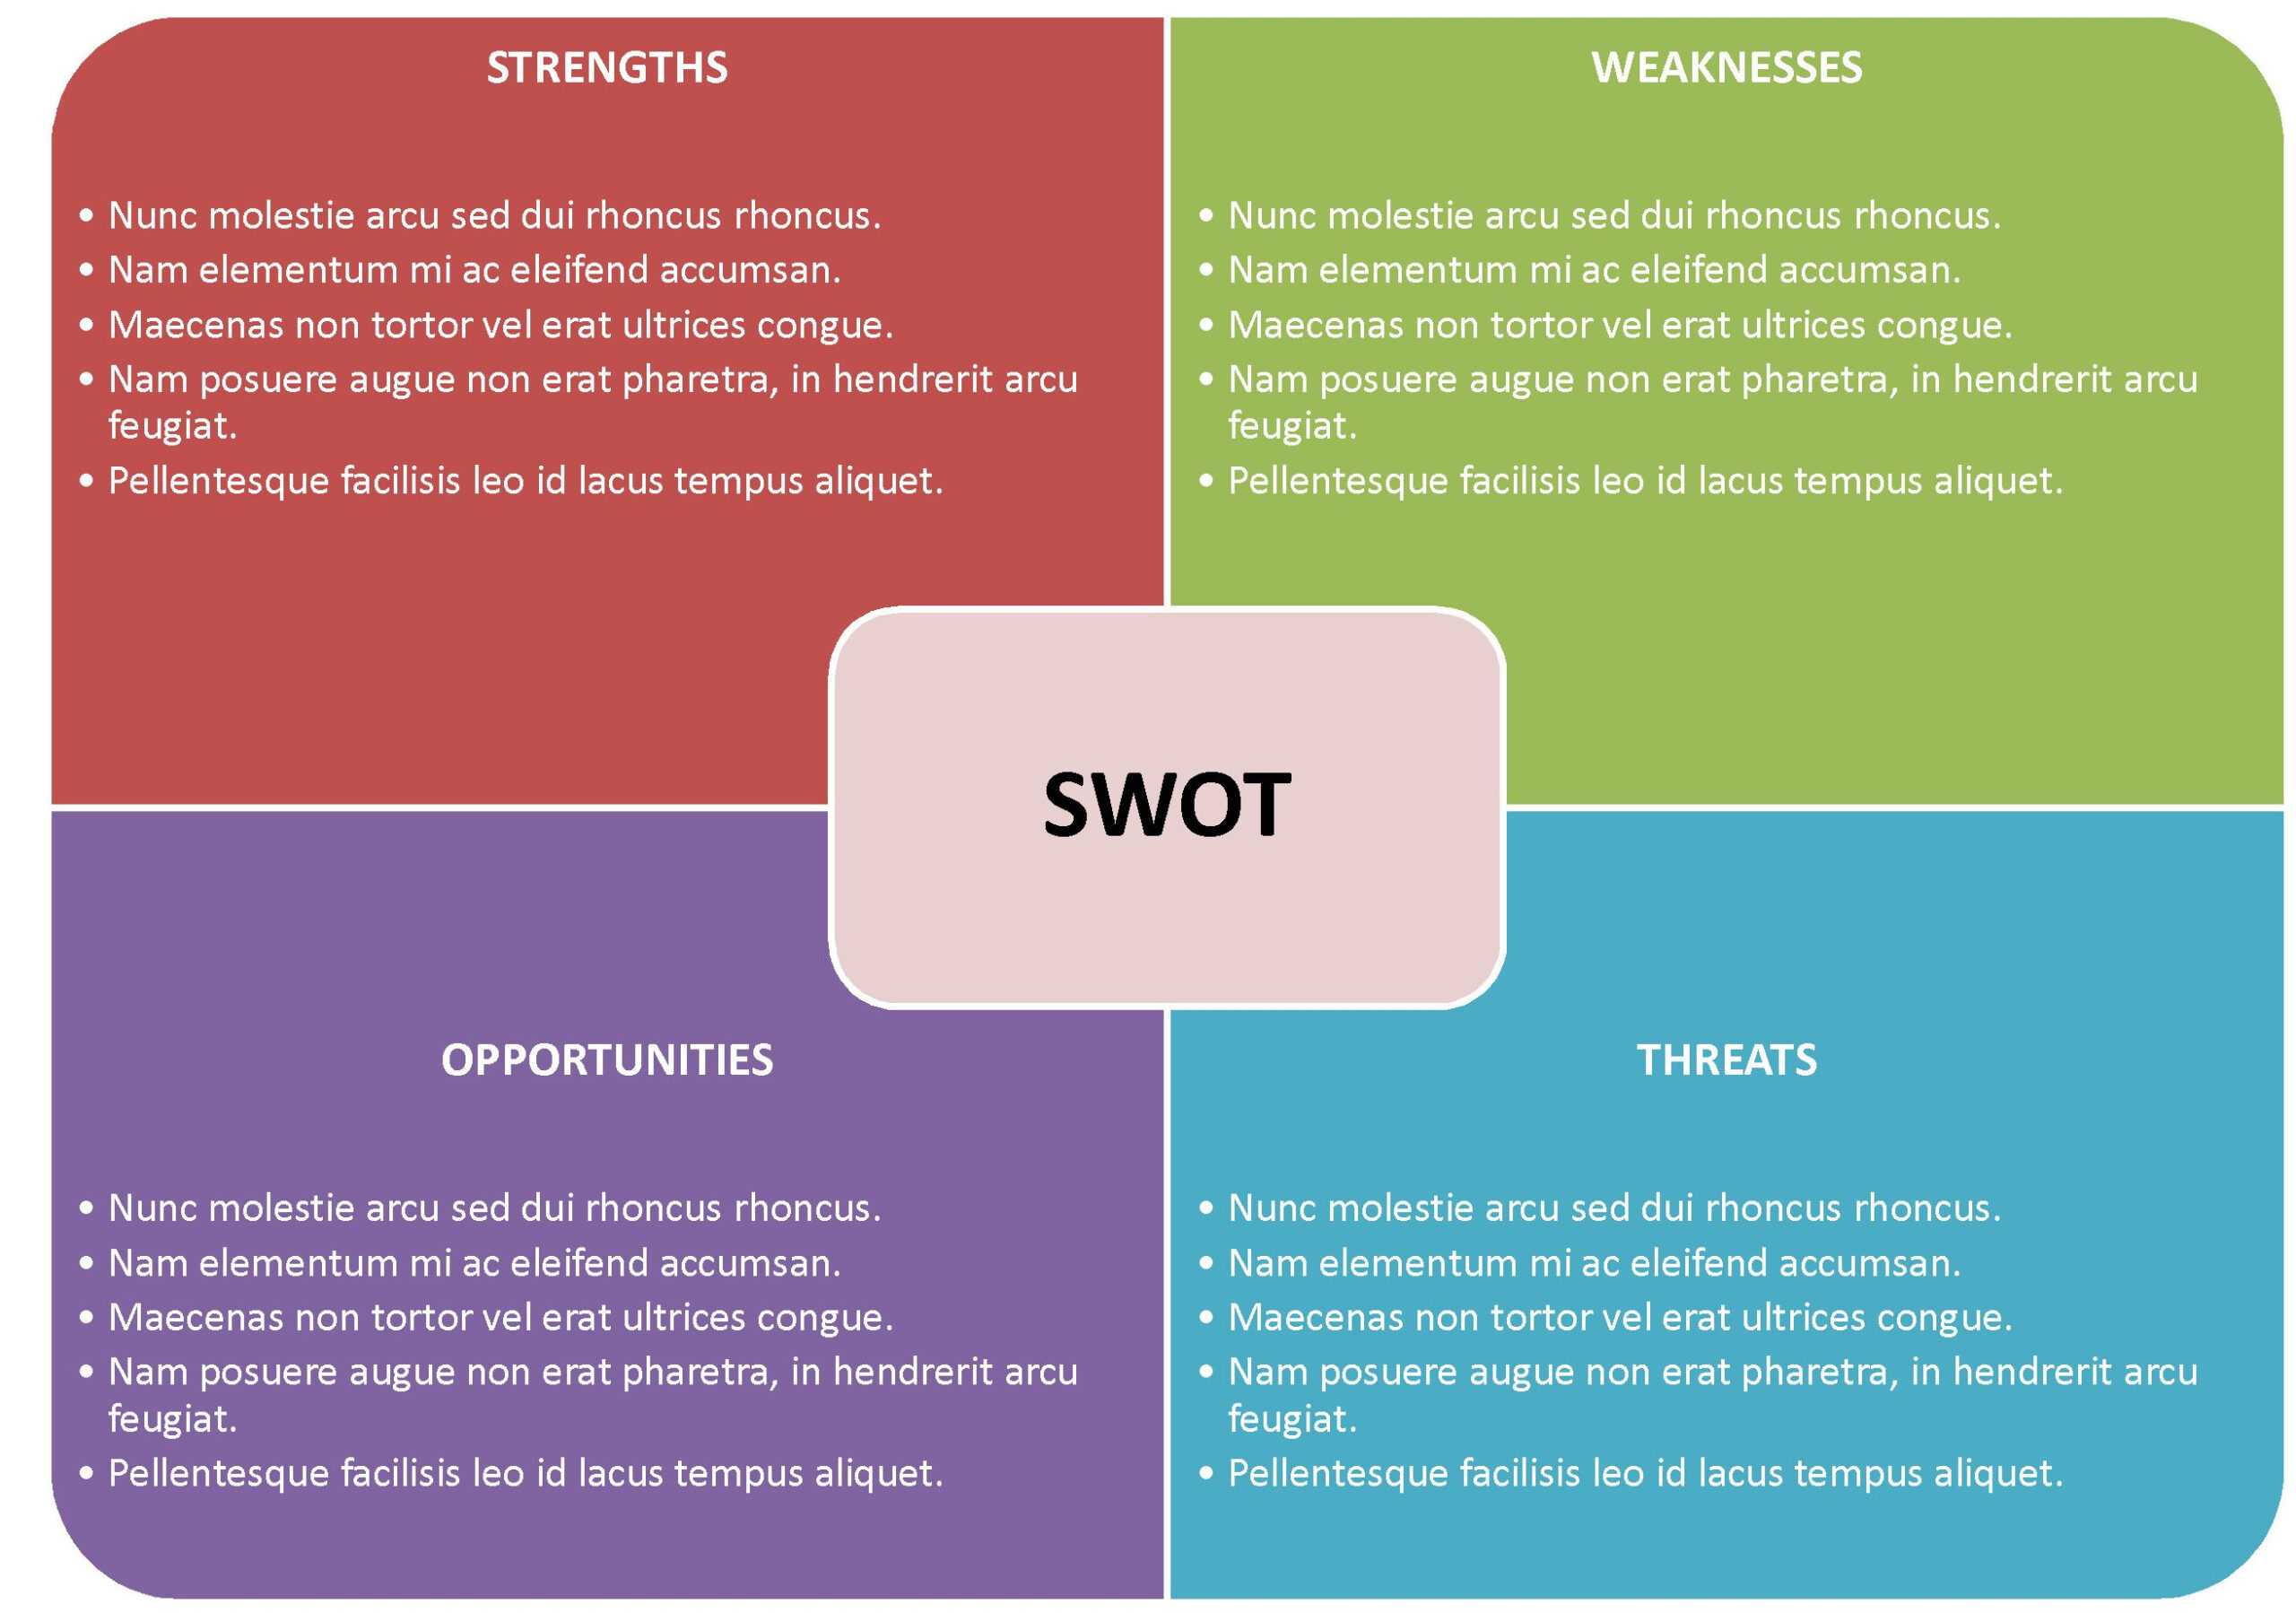 Ede79 Free Swot Template Word | Wiring Resources In Swot Template For Word